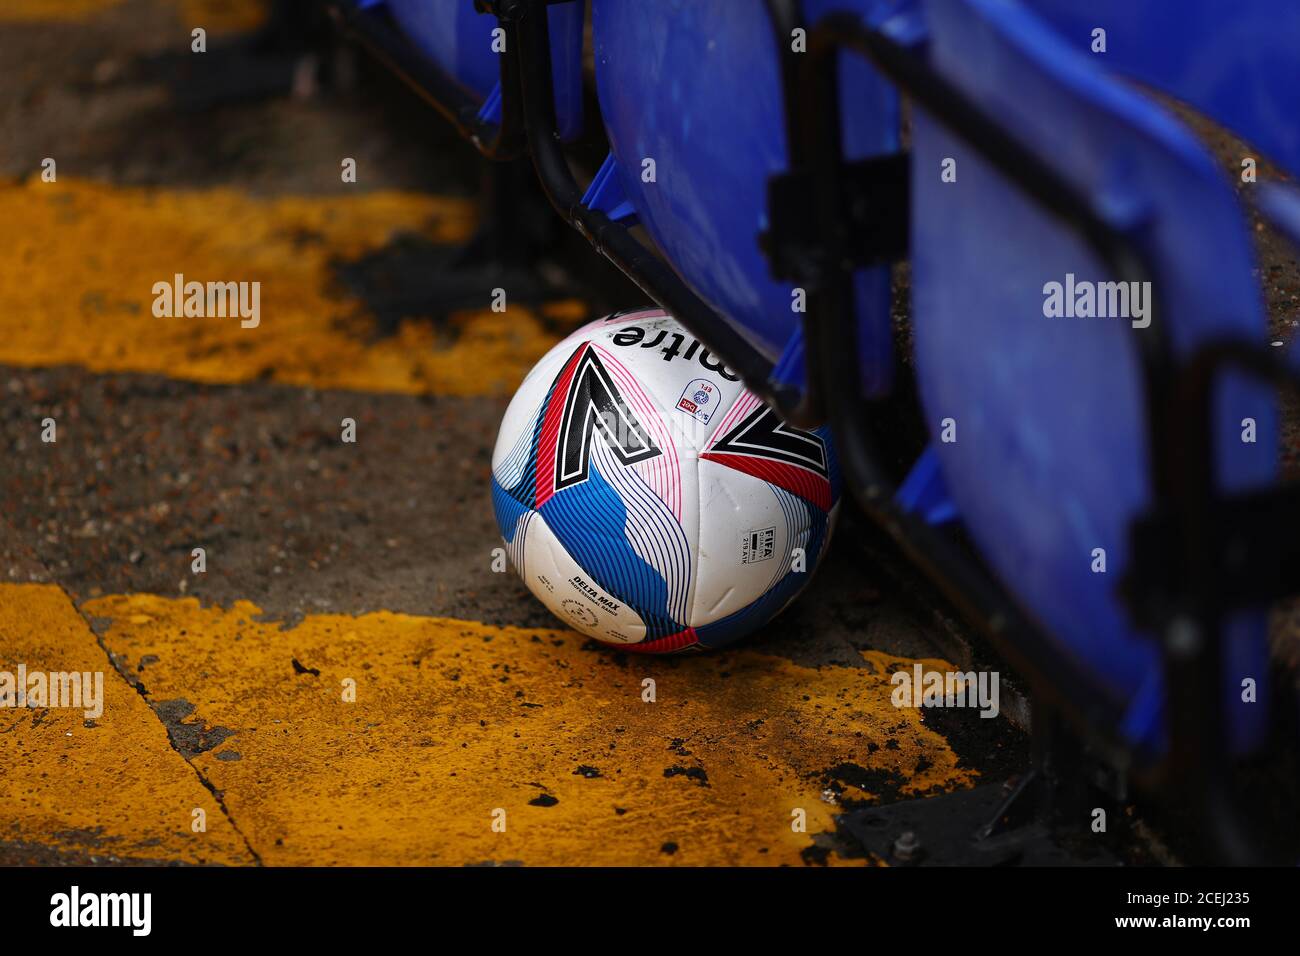 Mitre Delta Max EFL football in the stand - Ipswich Town v West Ham United, Pre-Season Friendly, Portman Road, Ipswich, UK - 25th August 2020  Editorial Use Only Stock Photo